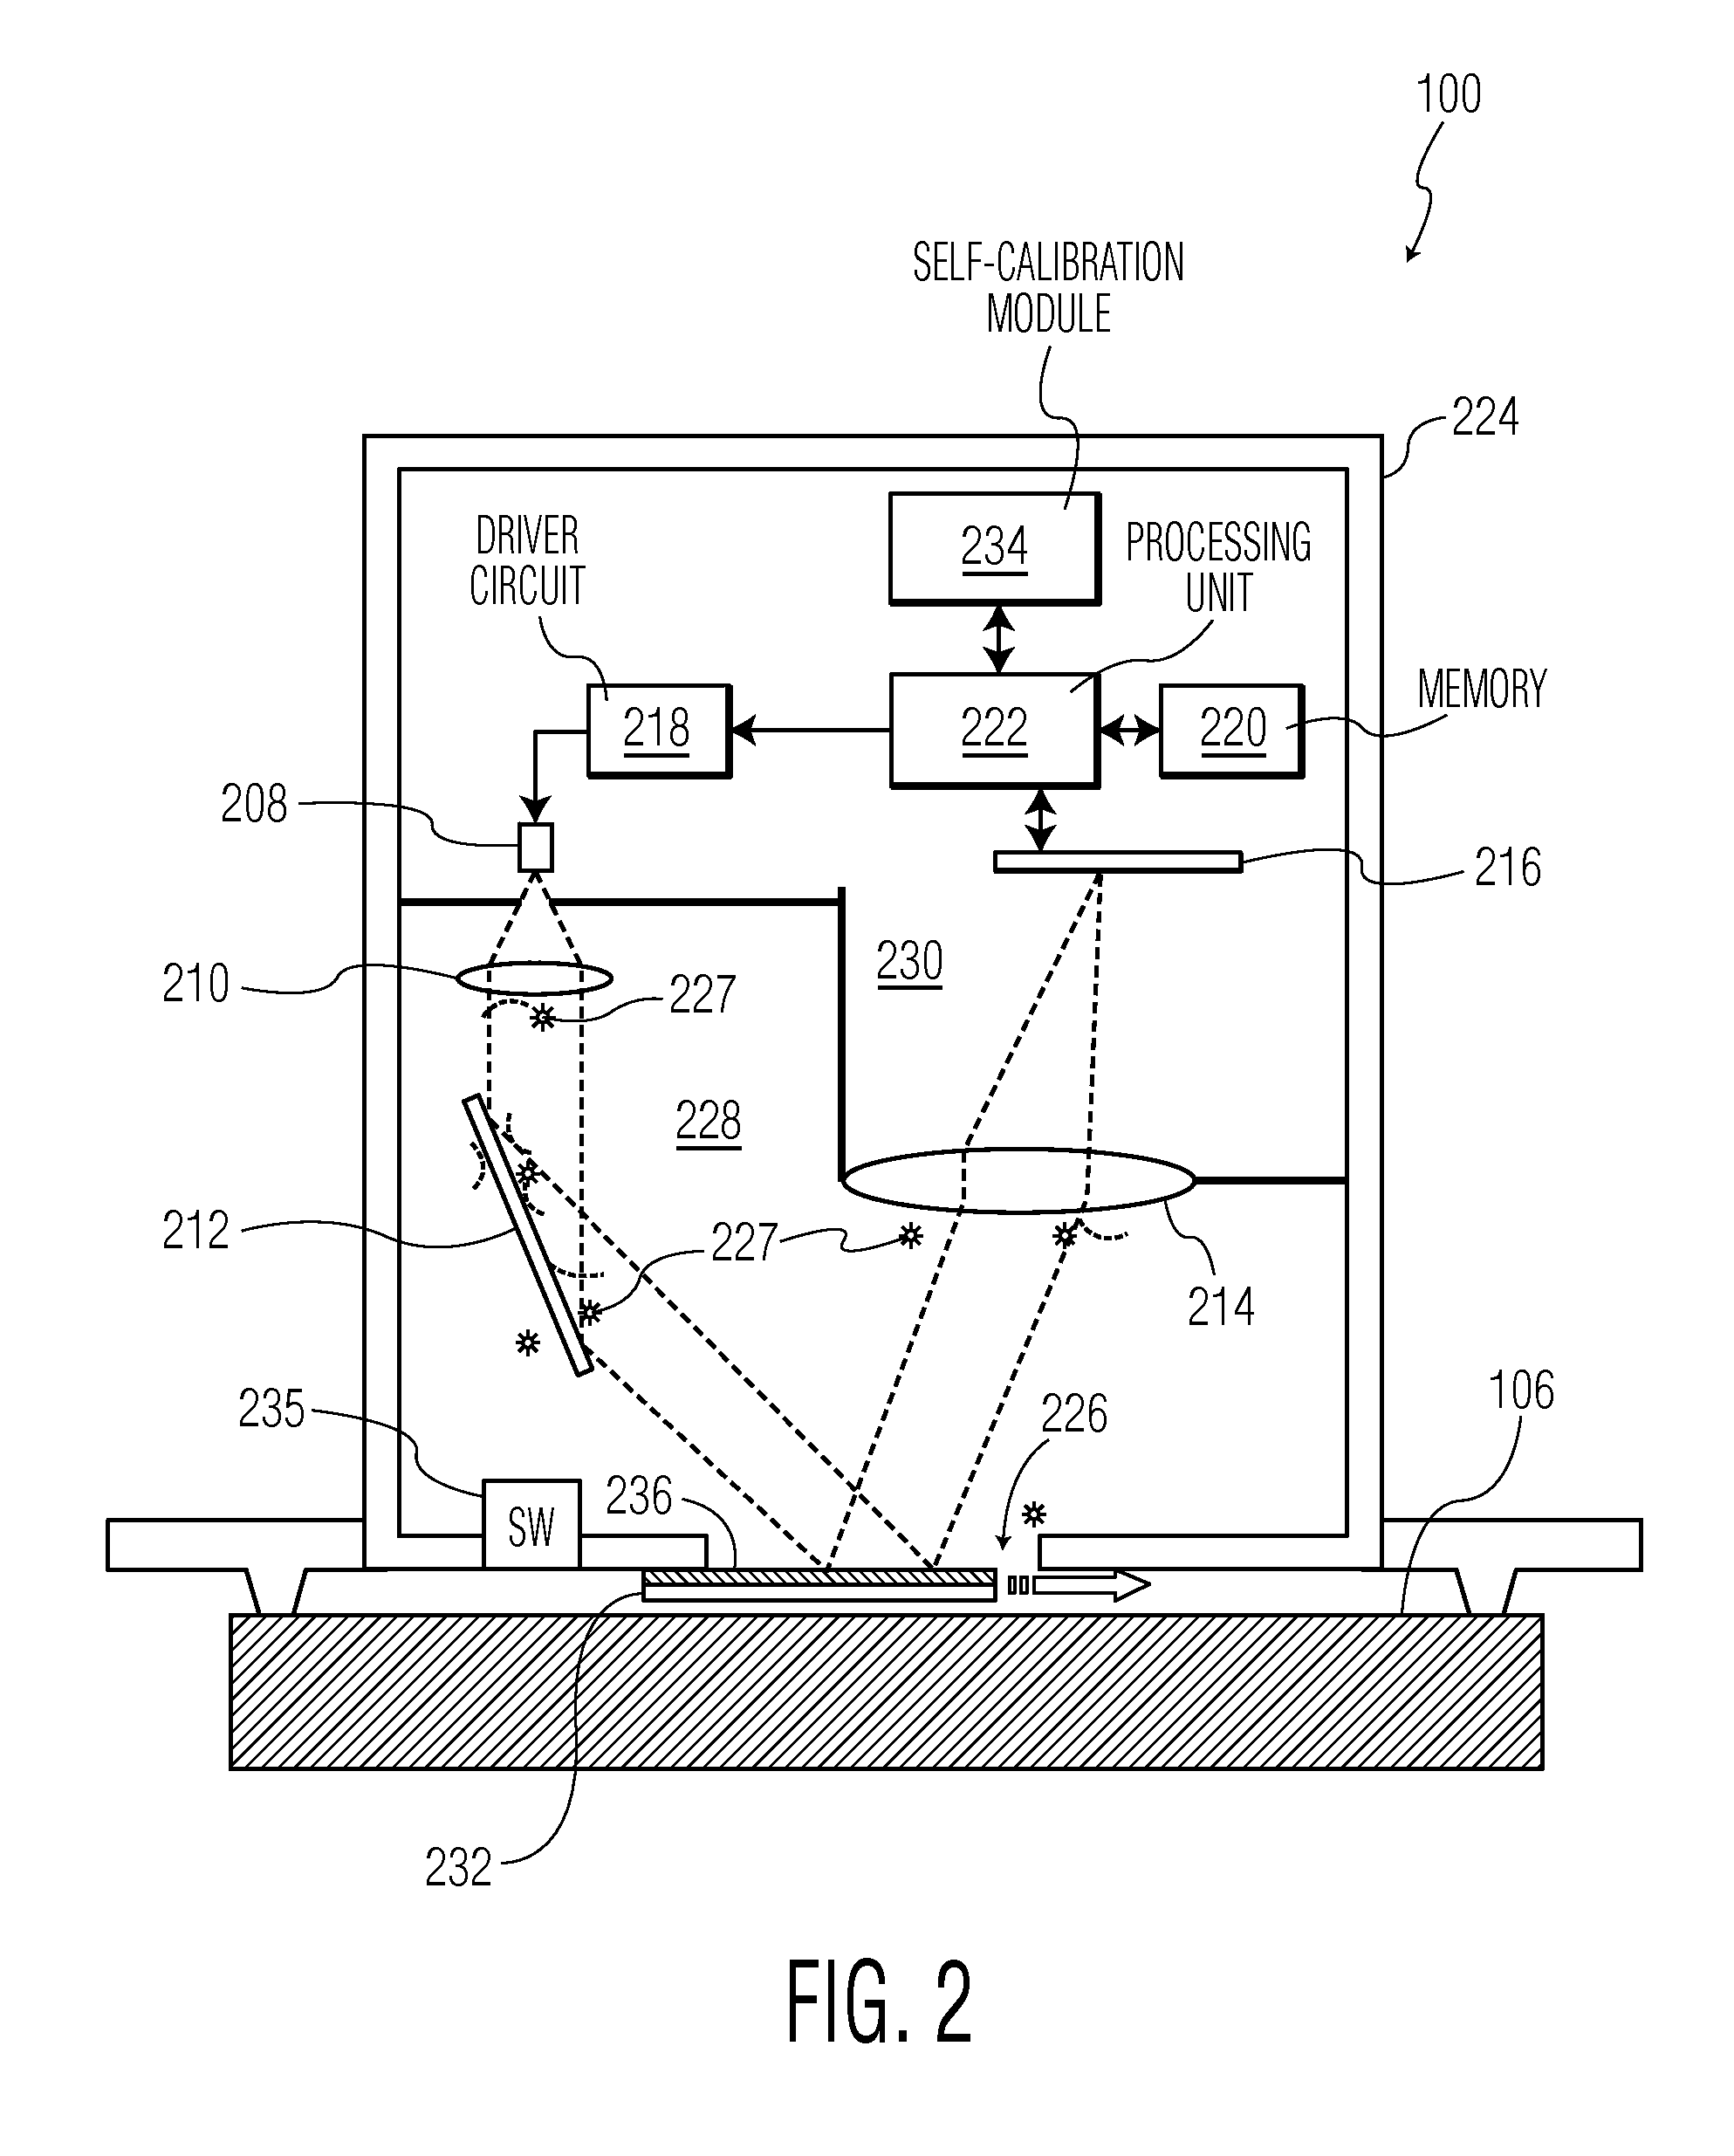 Optical navigation system and method for performing self-calibration on the system using a calibration cover